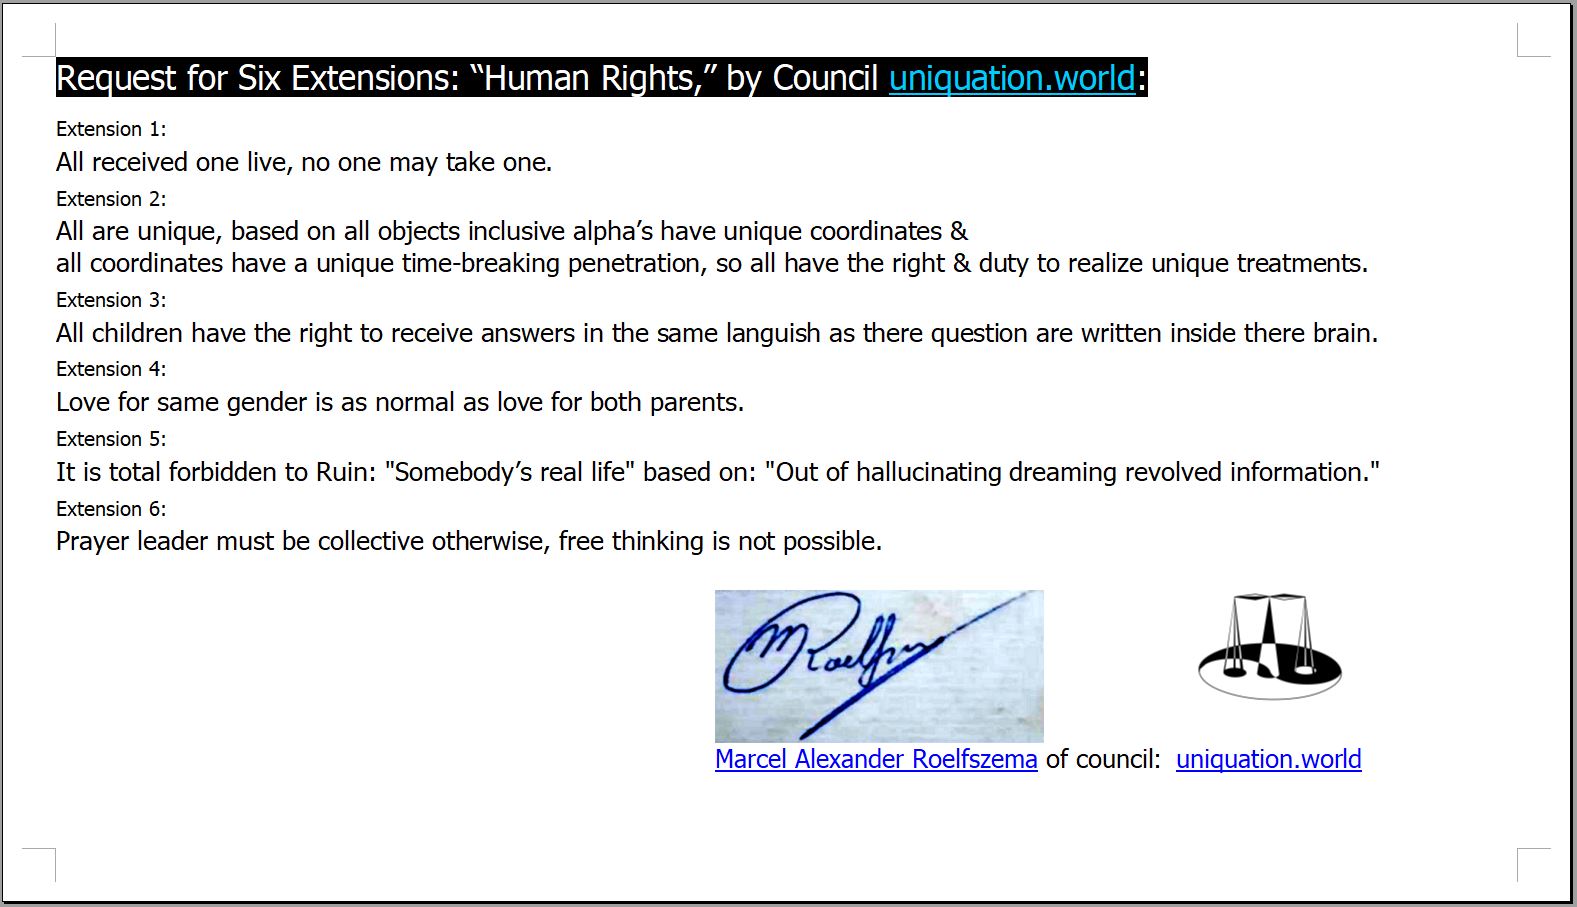 Request for Six Extensions Human Rights by Council uniquation world.pdf